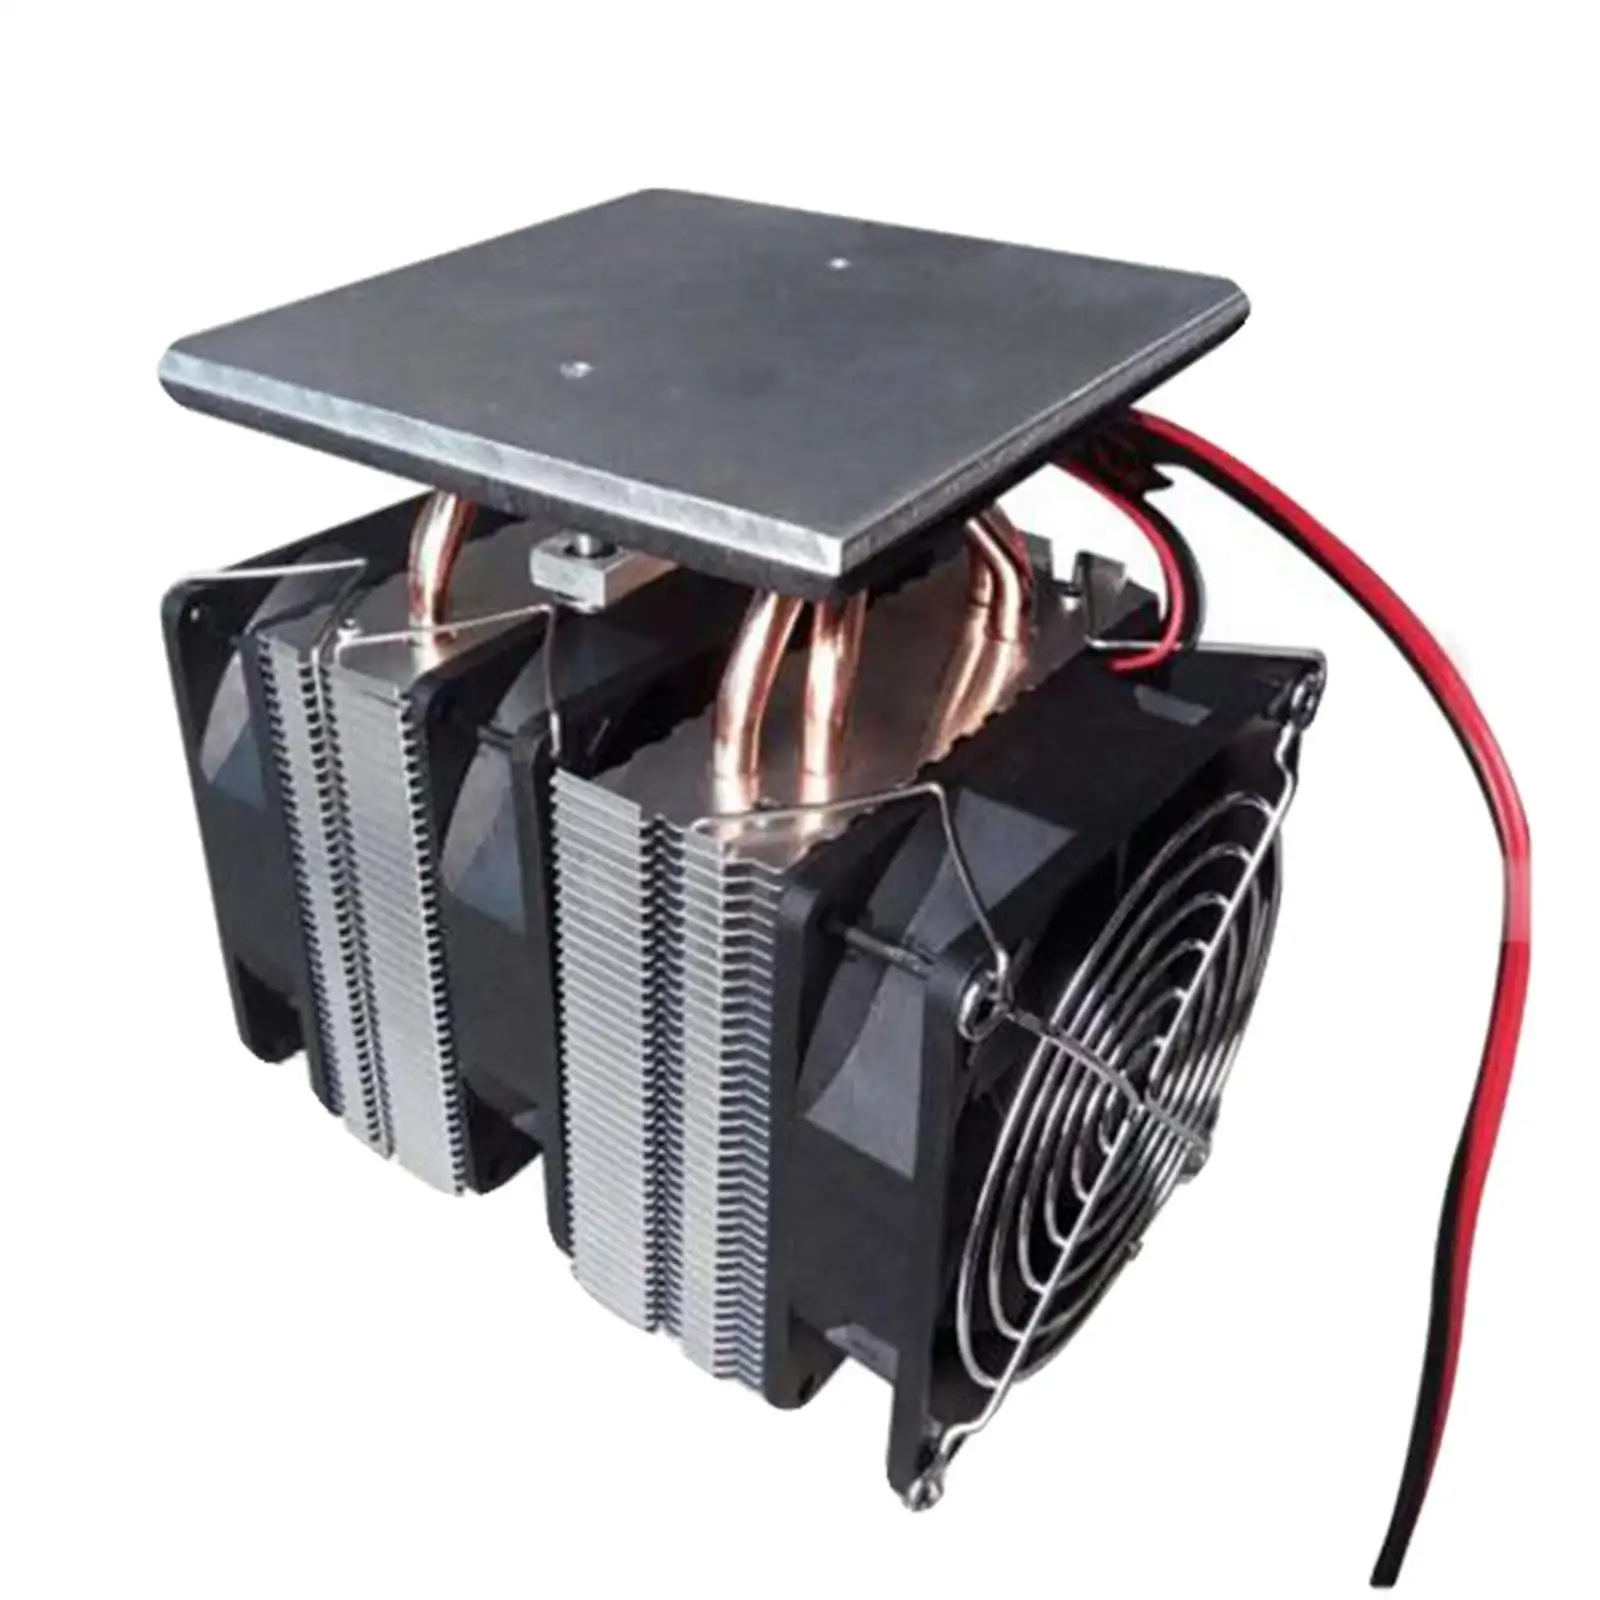 12V 240W Peltier Cooler Kit with Power with Fan Semiconductor Refrigeration